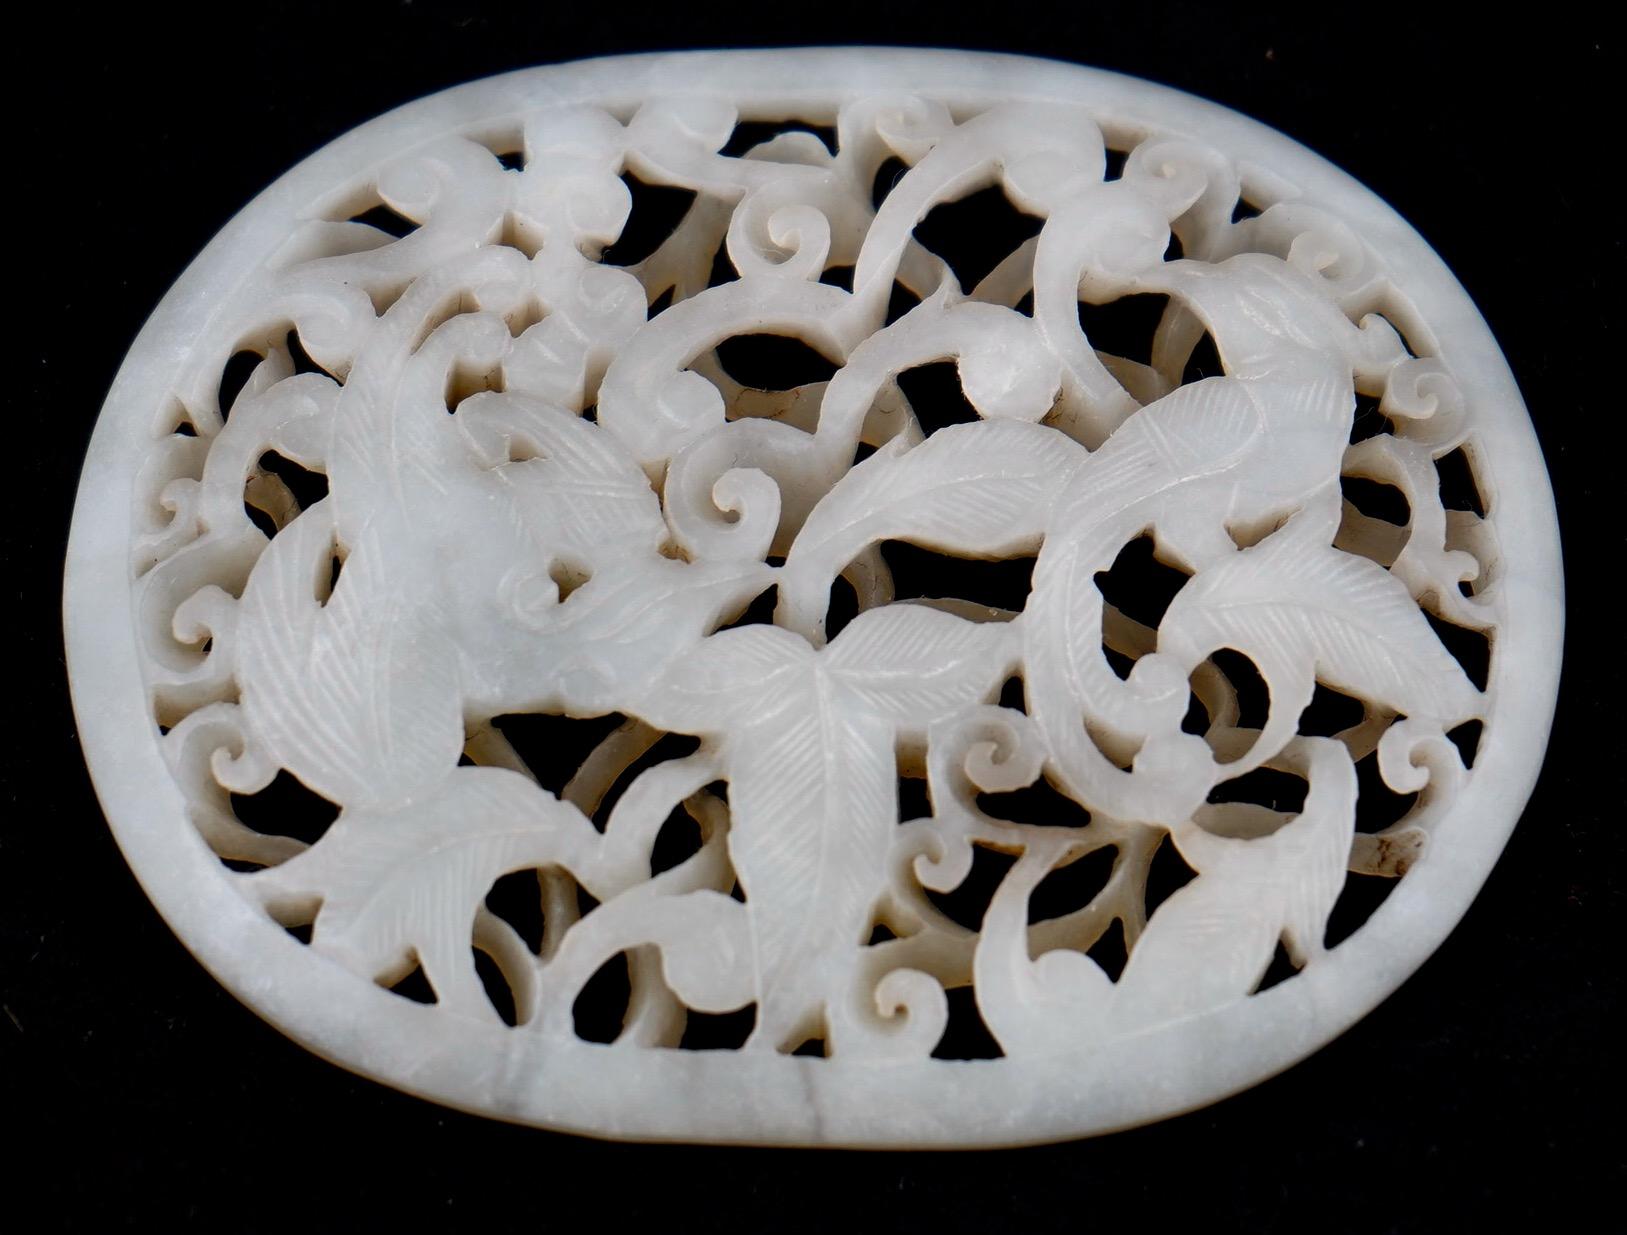 Chinese white jade openwork plaque late Qing Dynasty depicting birds and flowers. Very fine and detailed work. Small loss on the back side of the plaque.